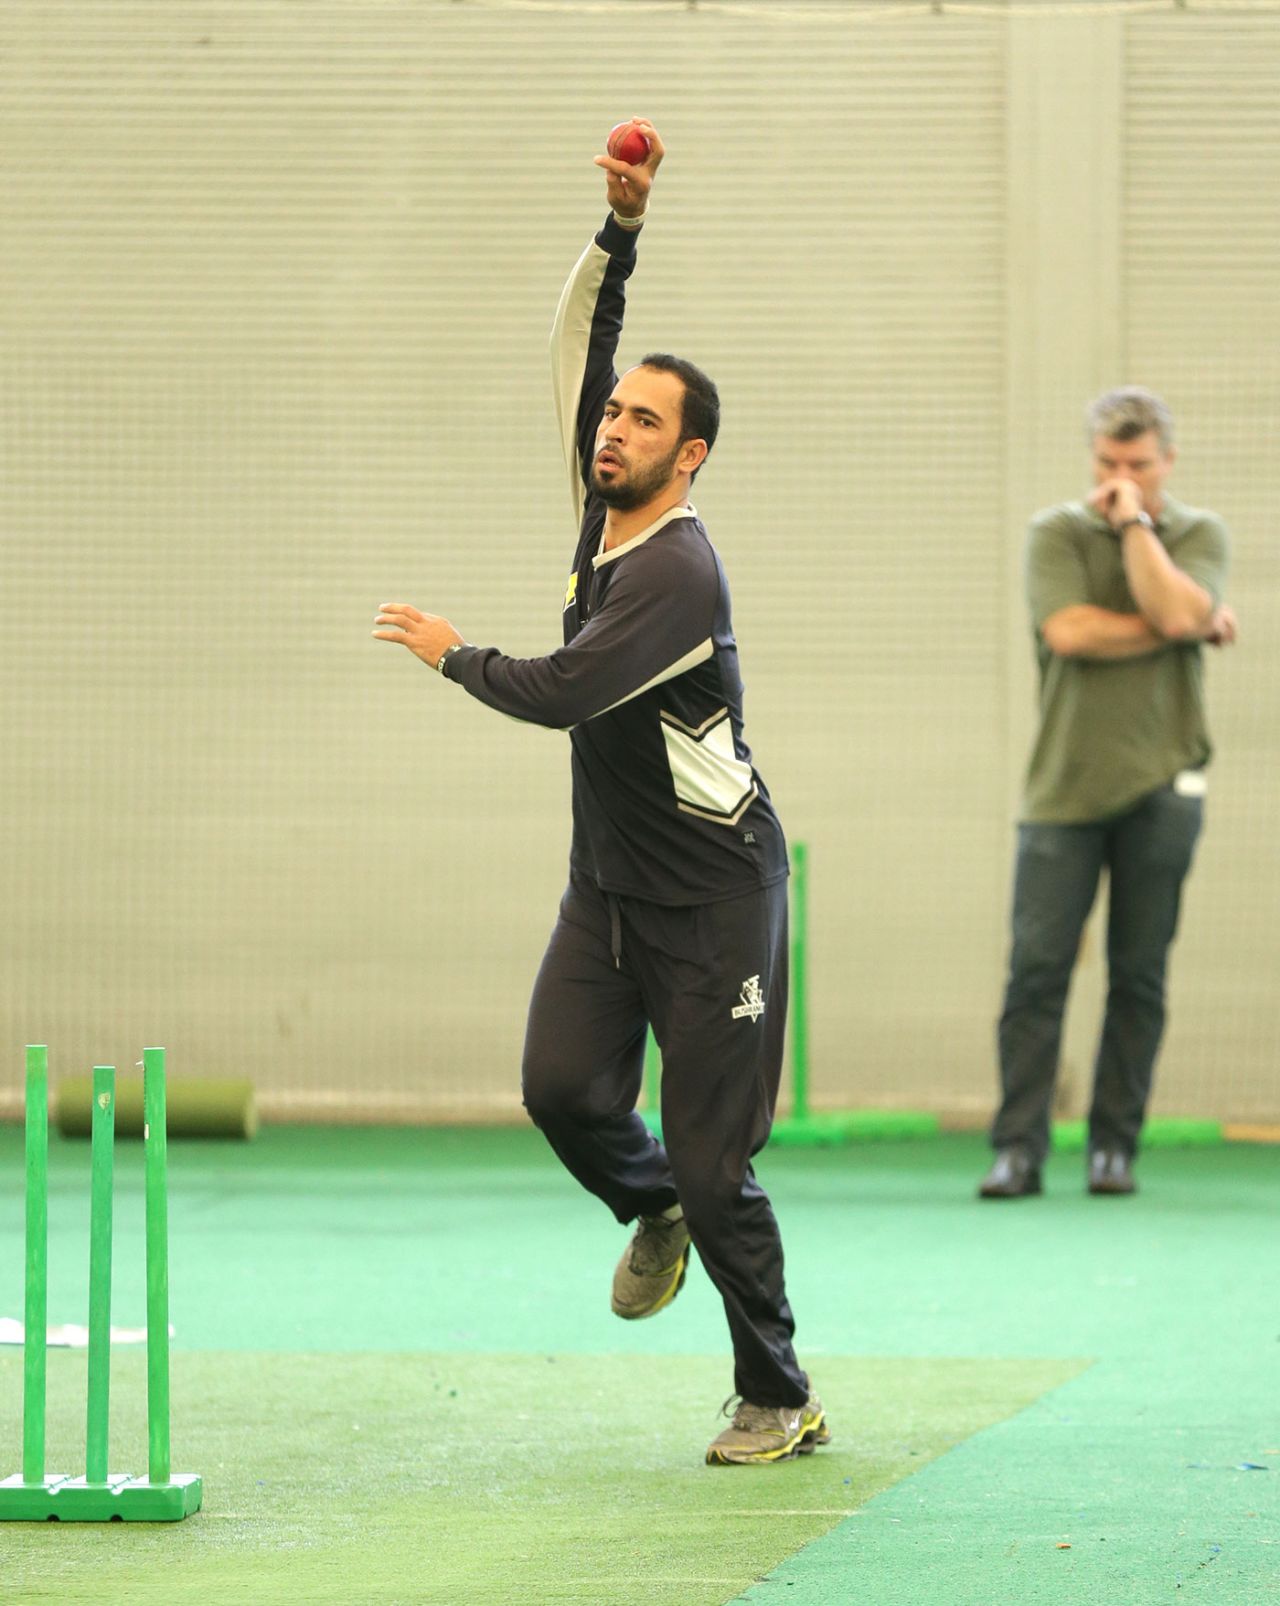 Fawad Ahmed bowls in the nets as Stuart MacGill looks on, Sydney, March 28, 2013